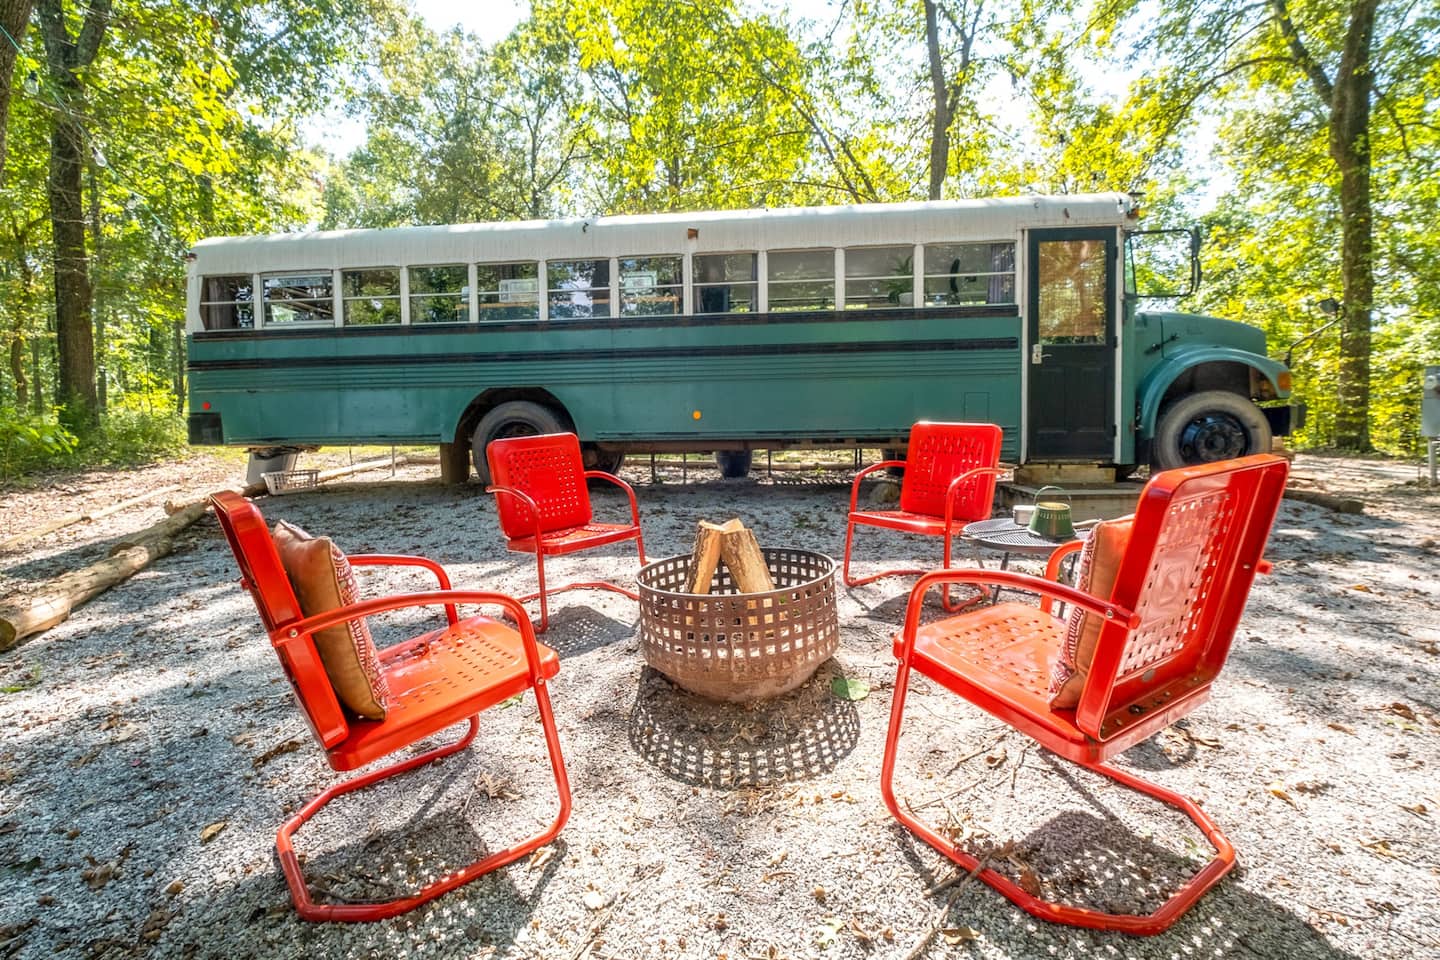 Emerald Gypsy Skoolie, one of the best airbnbs in the united states